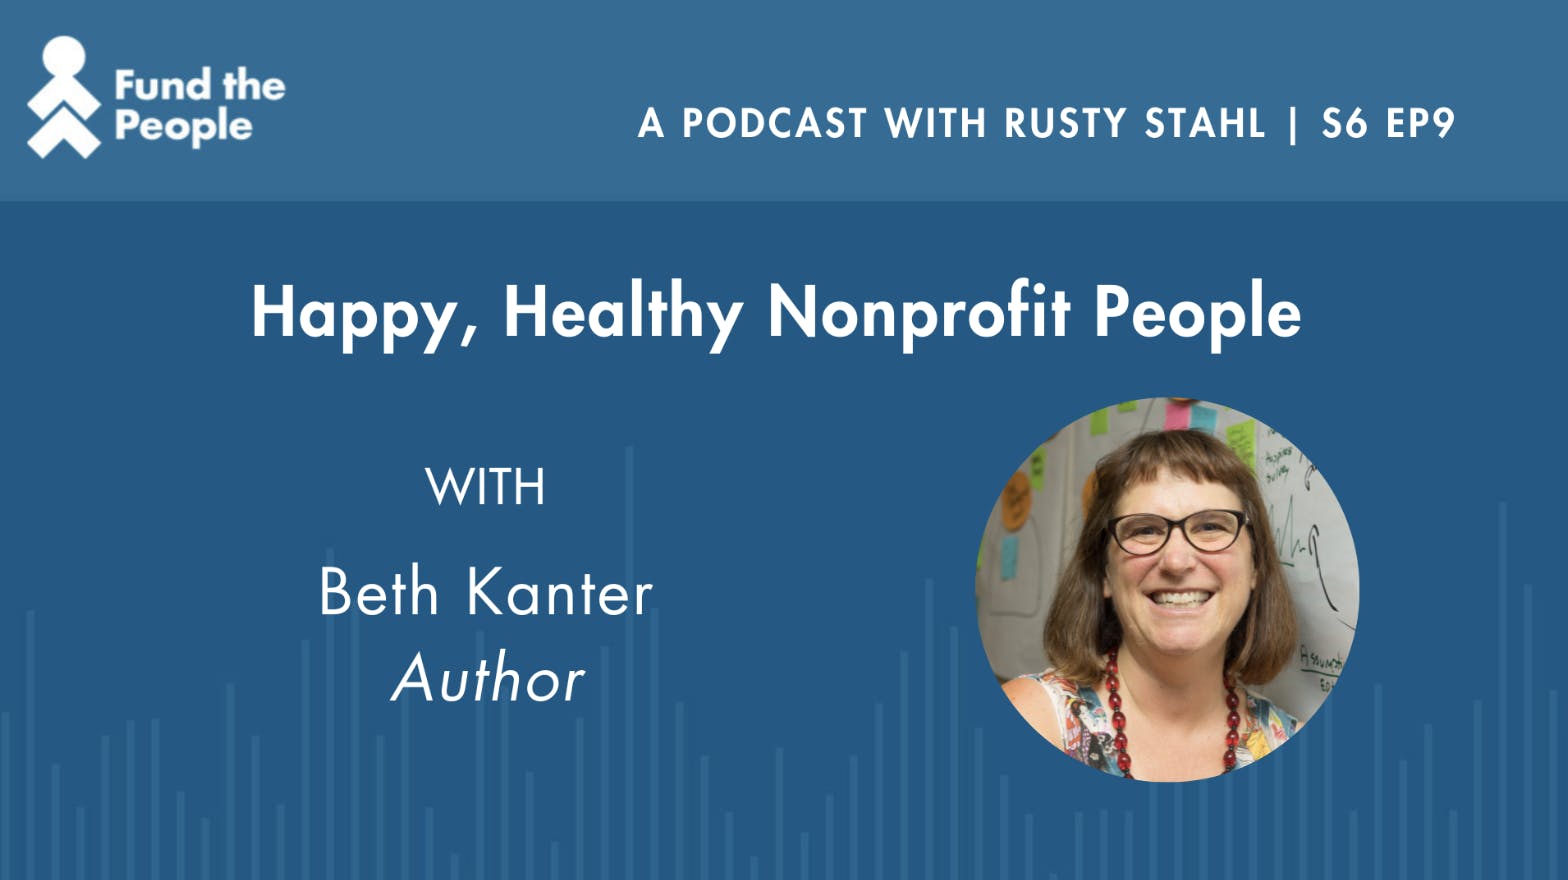 Happy, Healthy Nonprofit People with Beth Kanter